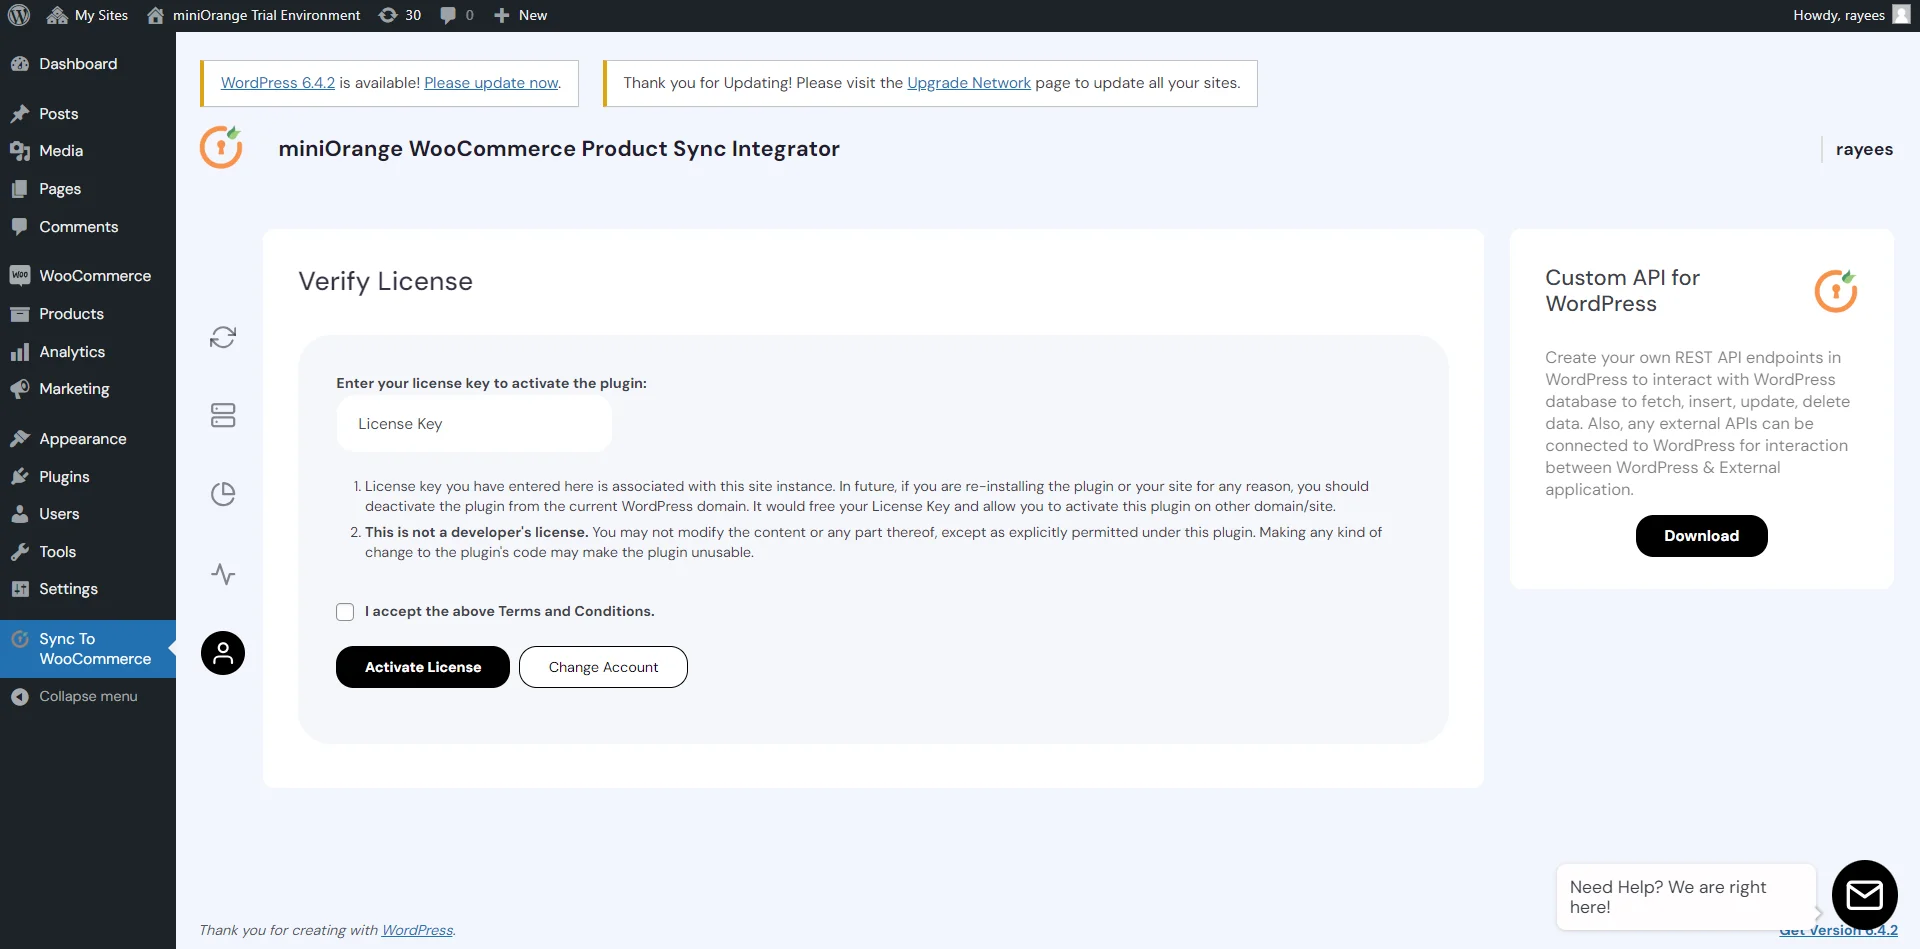 Configure WooCommerce Product Sync - Activating license